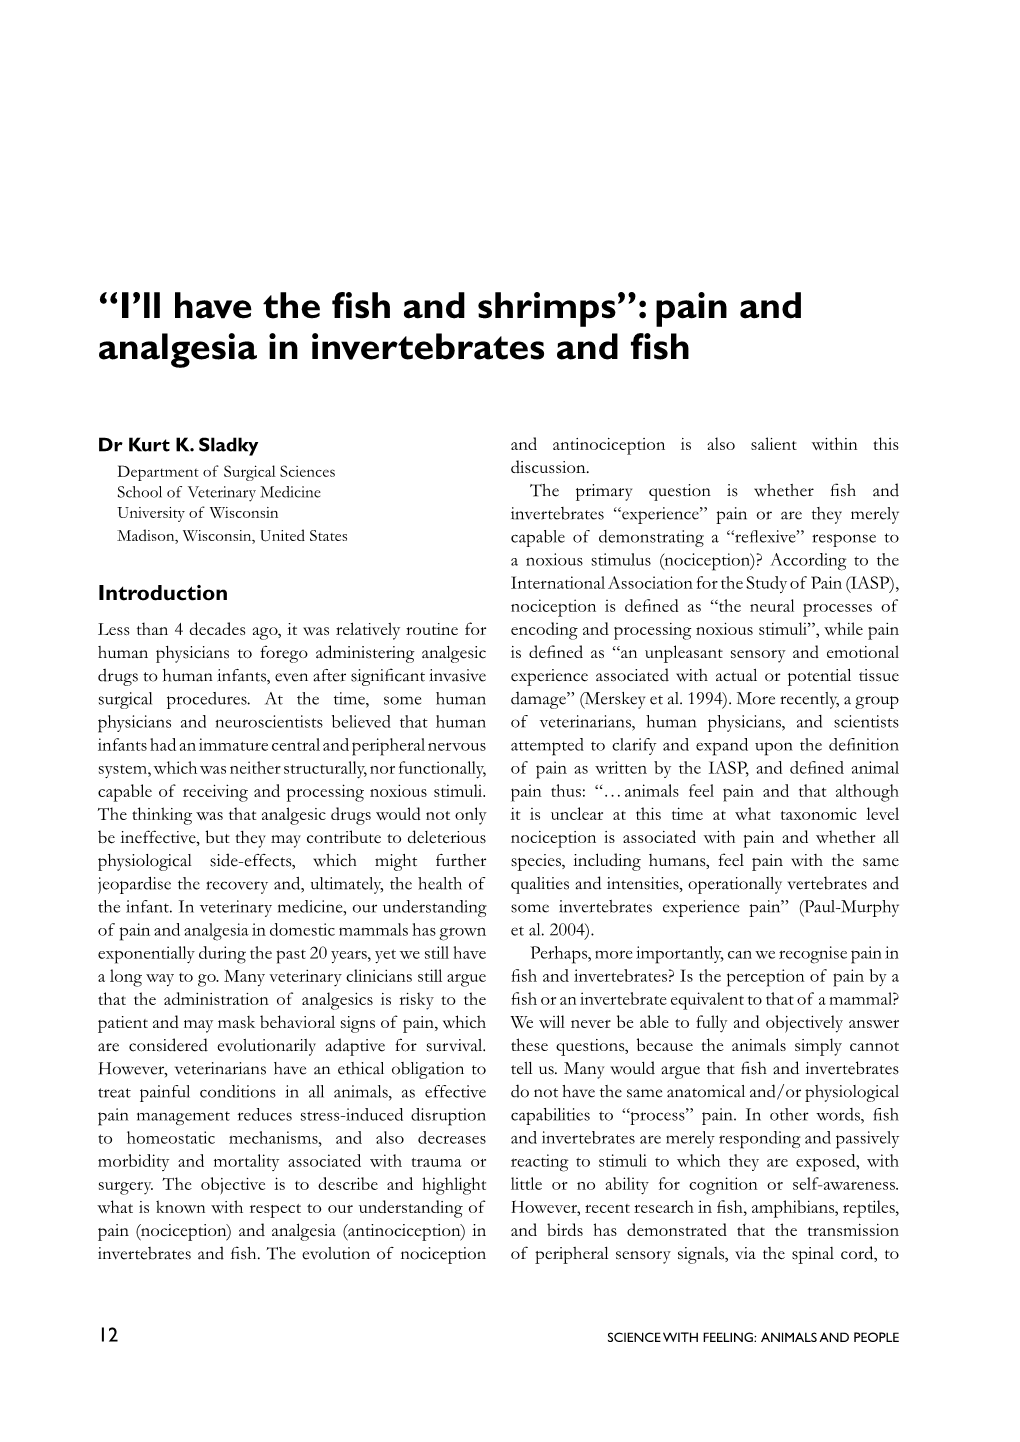 Pain and Analgesia in Invertebrates and Fish